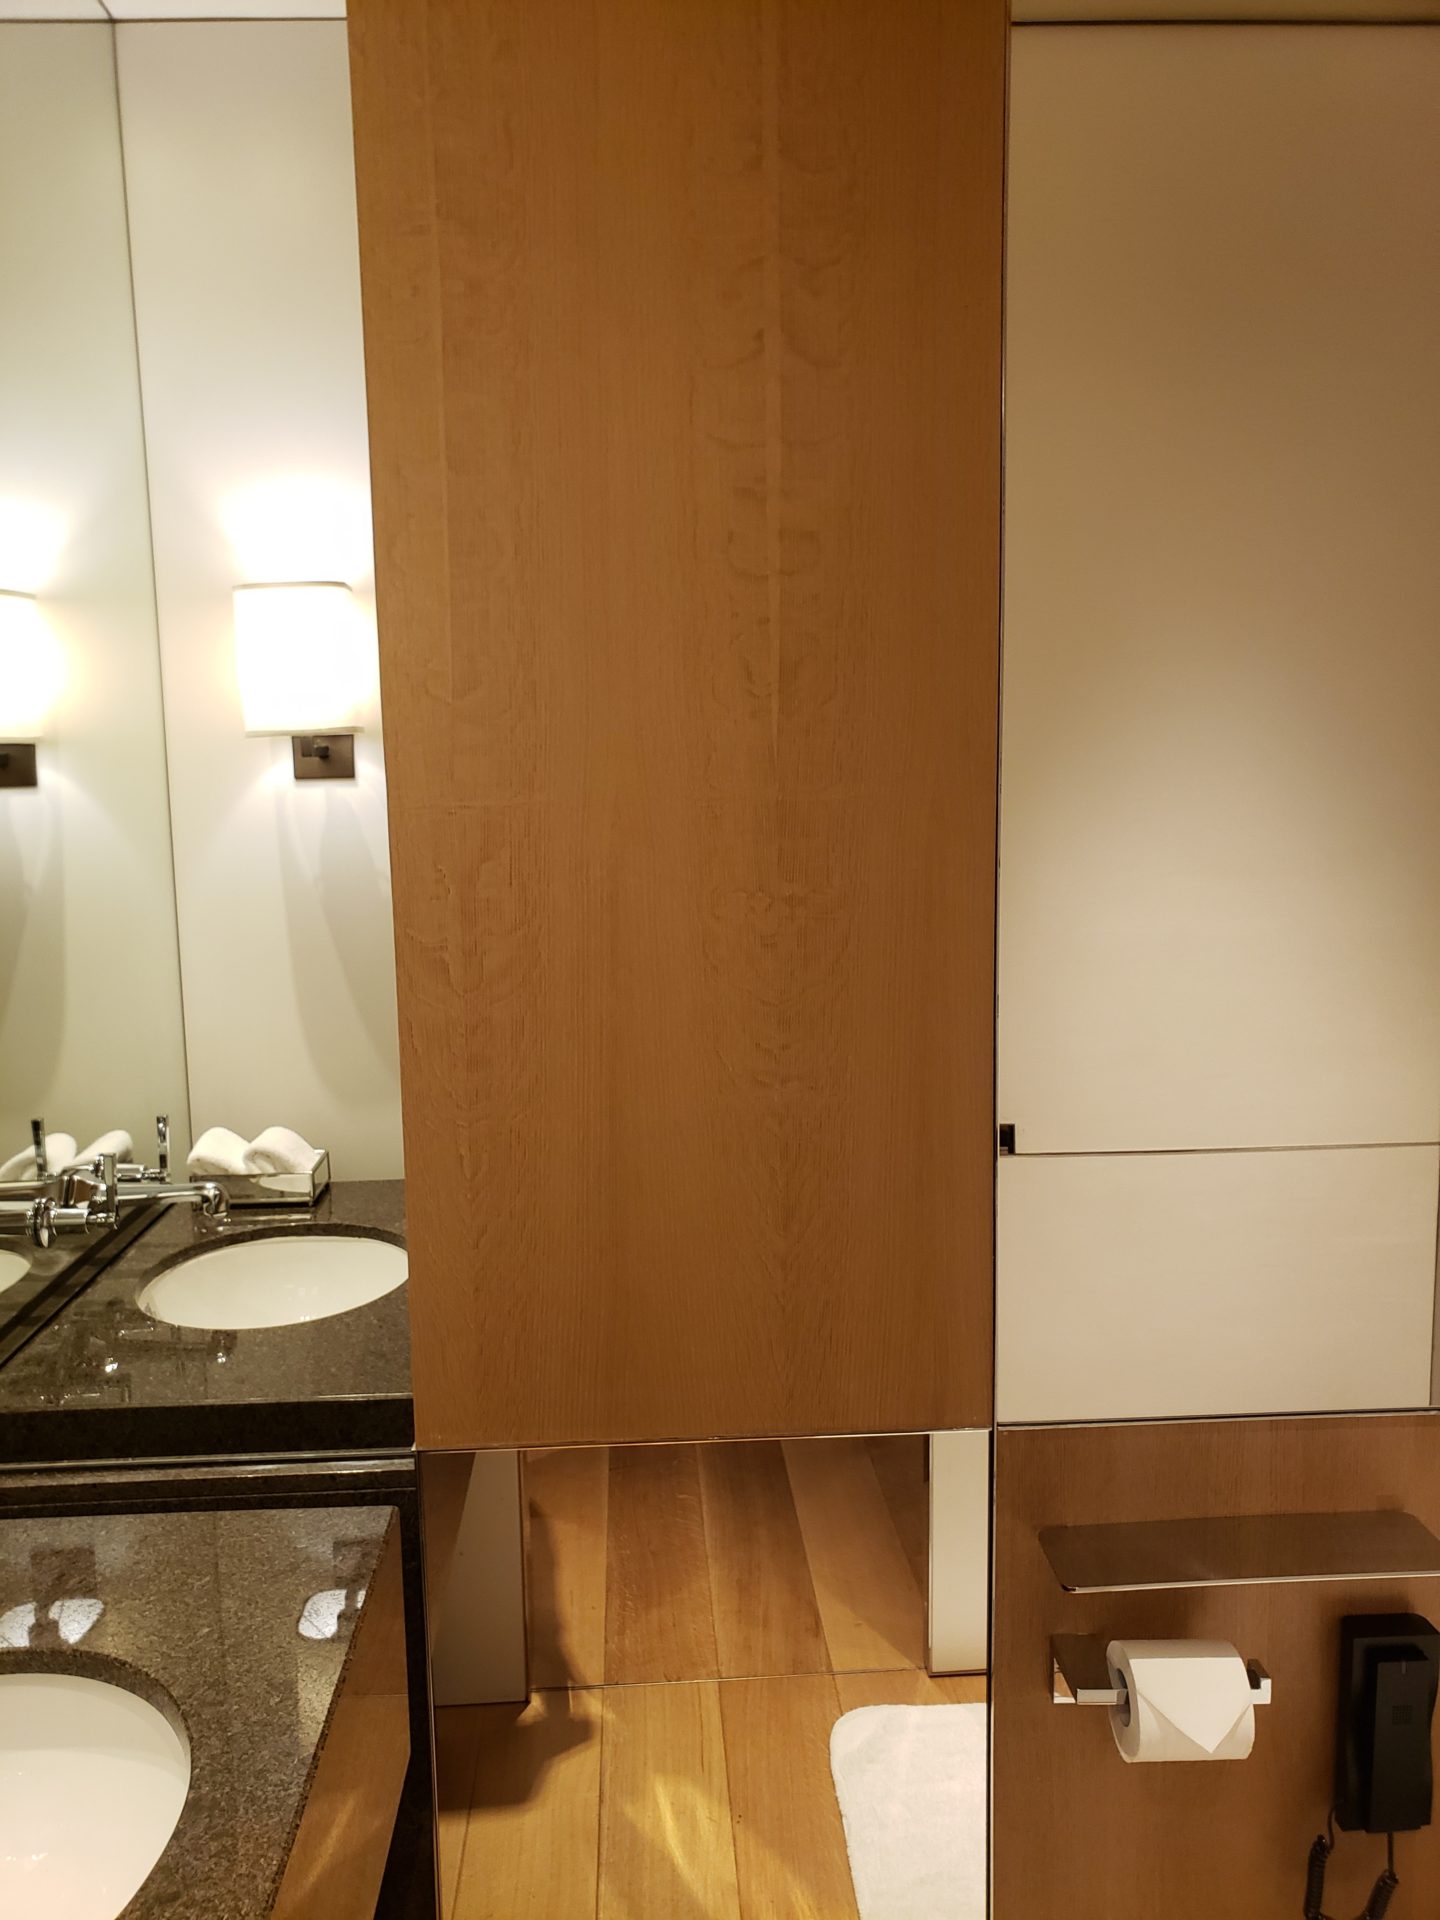 a bathroom with a wood cabinet and sink